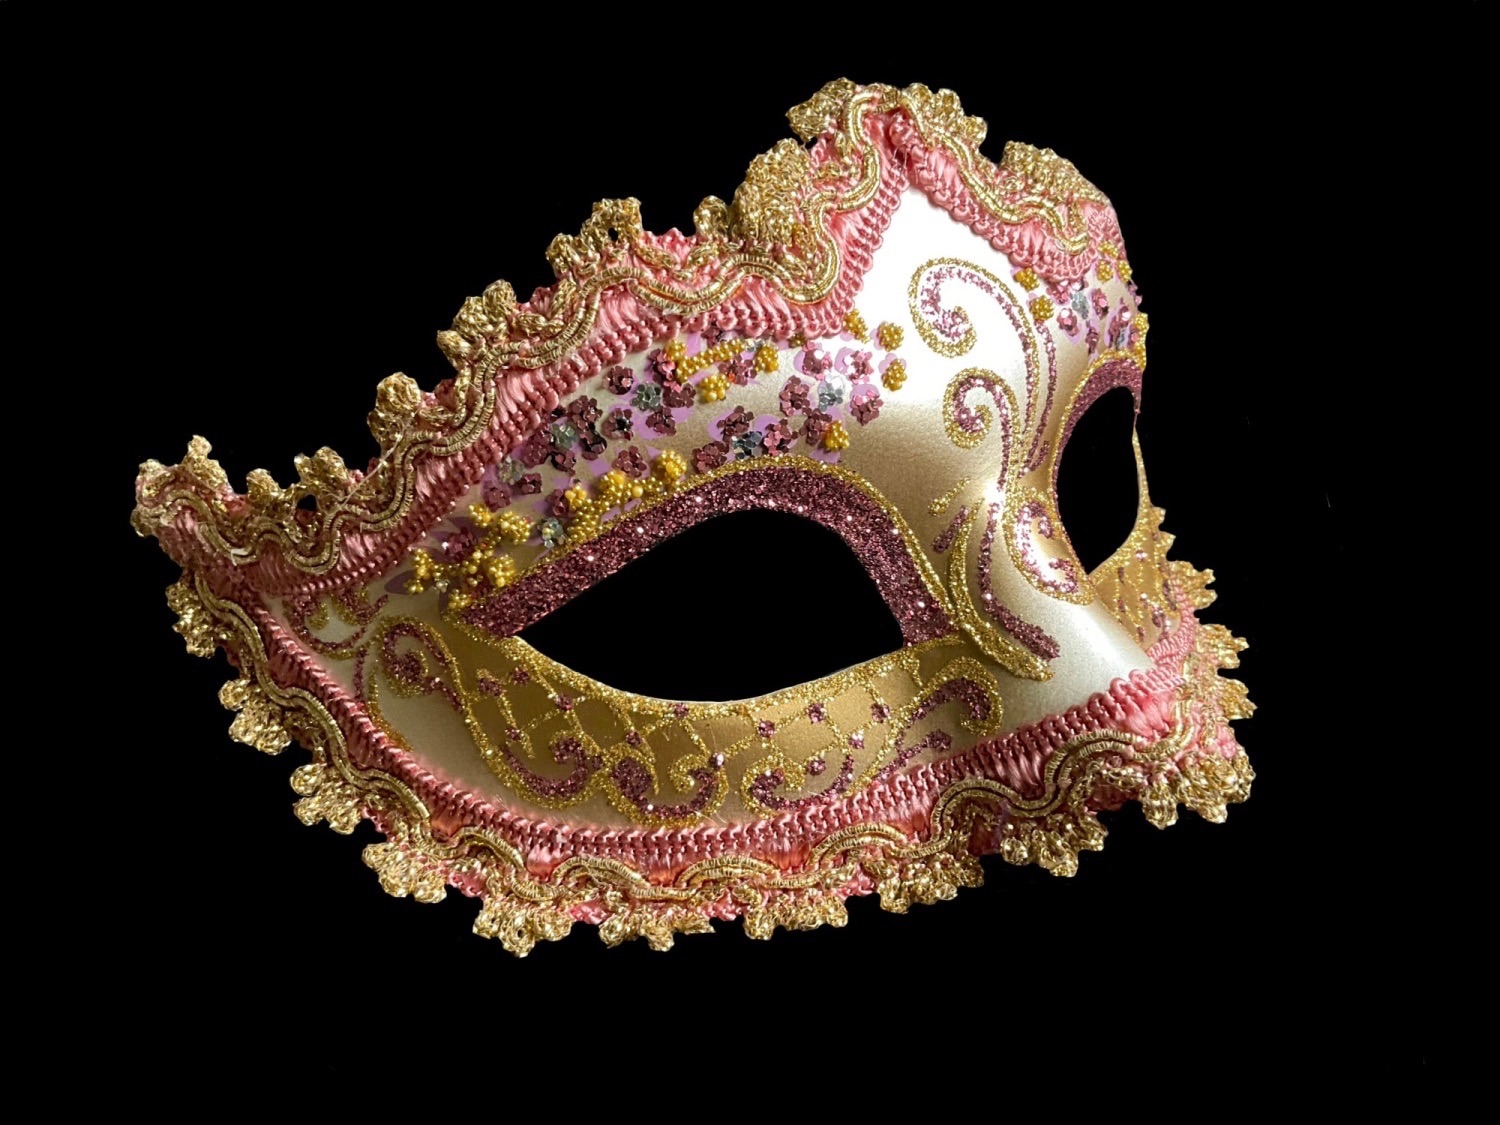 A Luxury Venetian Masquerade Ball Mask In a Stunning Aged  Gold And White Colours